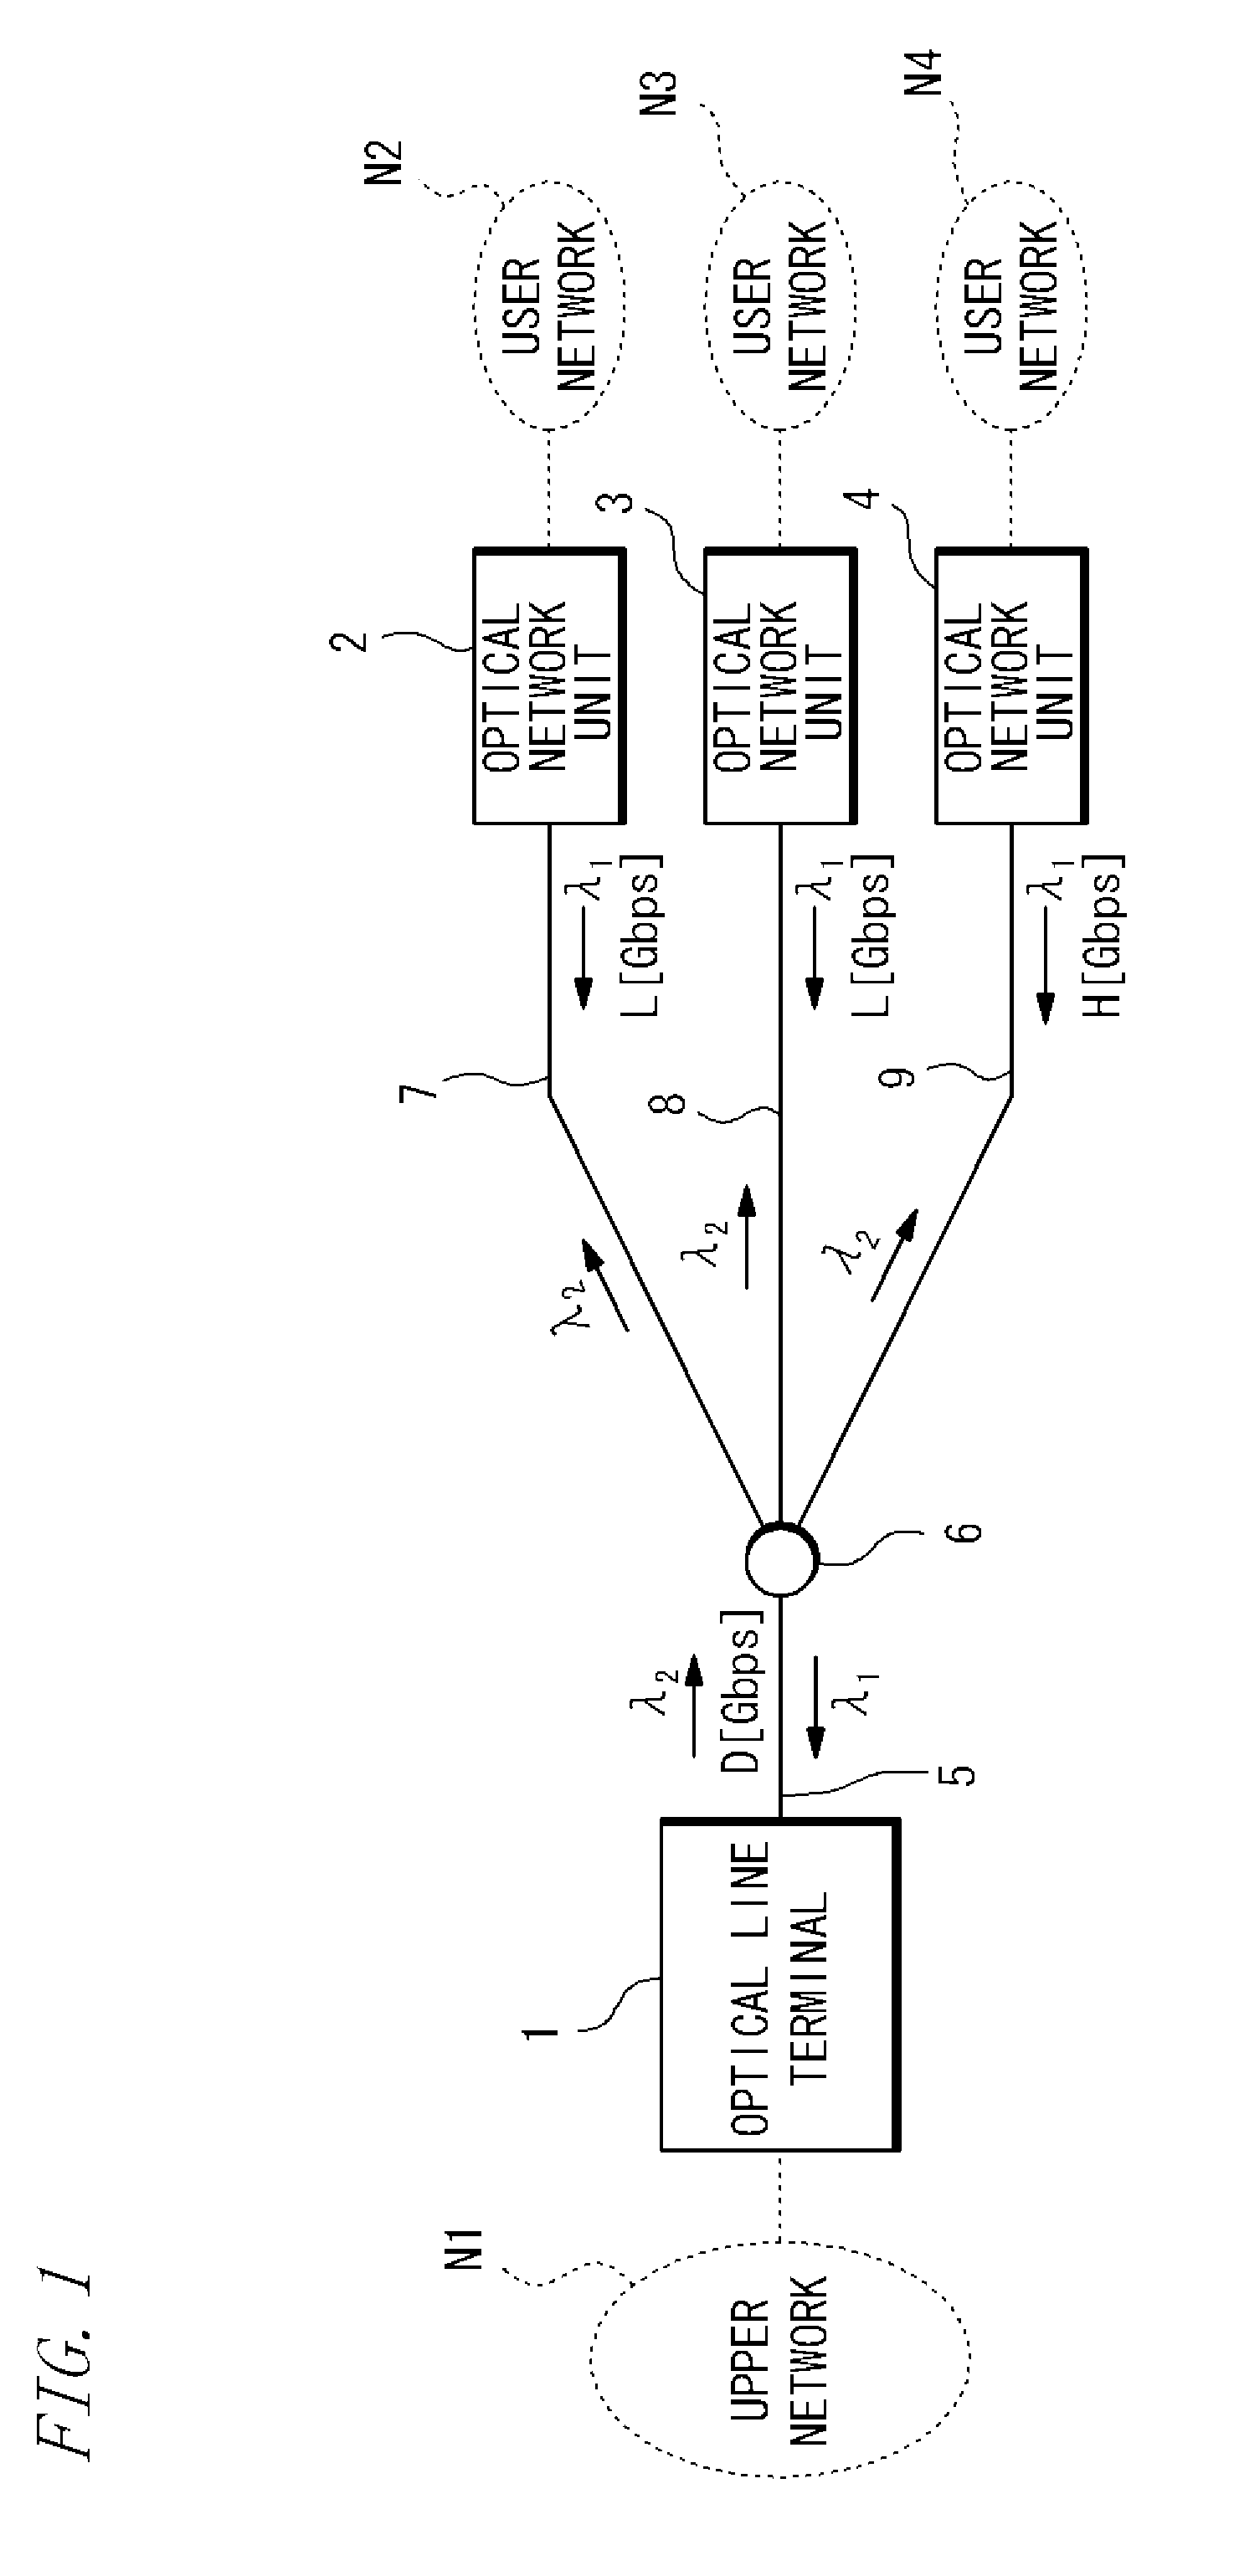 Receiving unit, optical line terminal, and frequency calibration method for clock and data recovery circuit